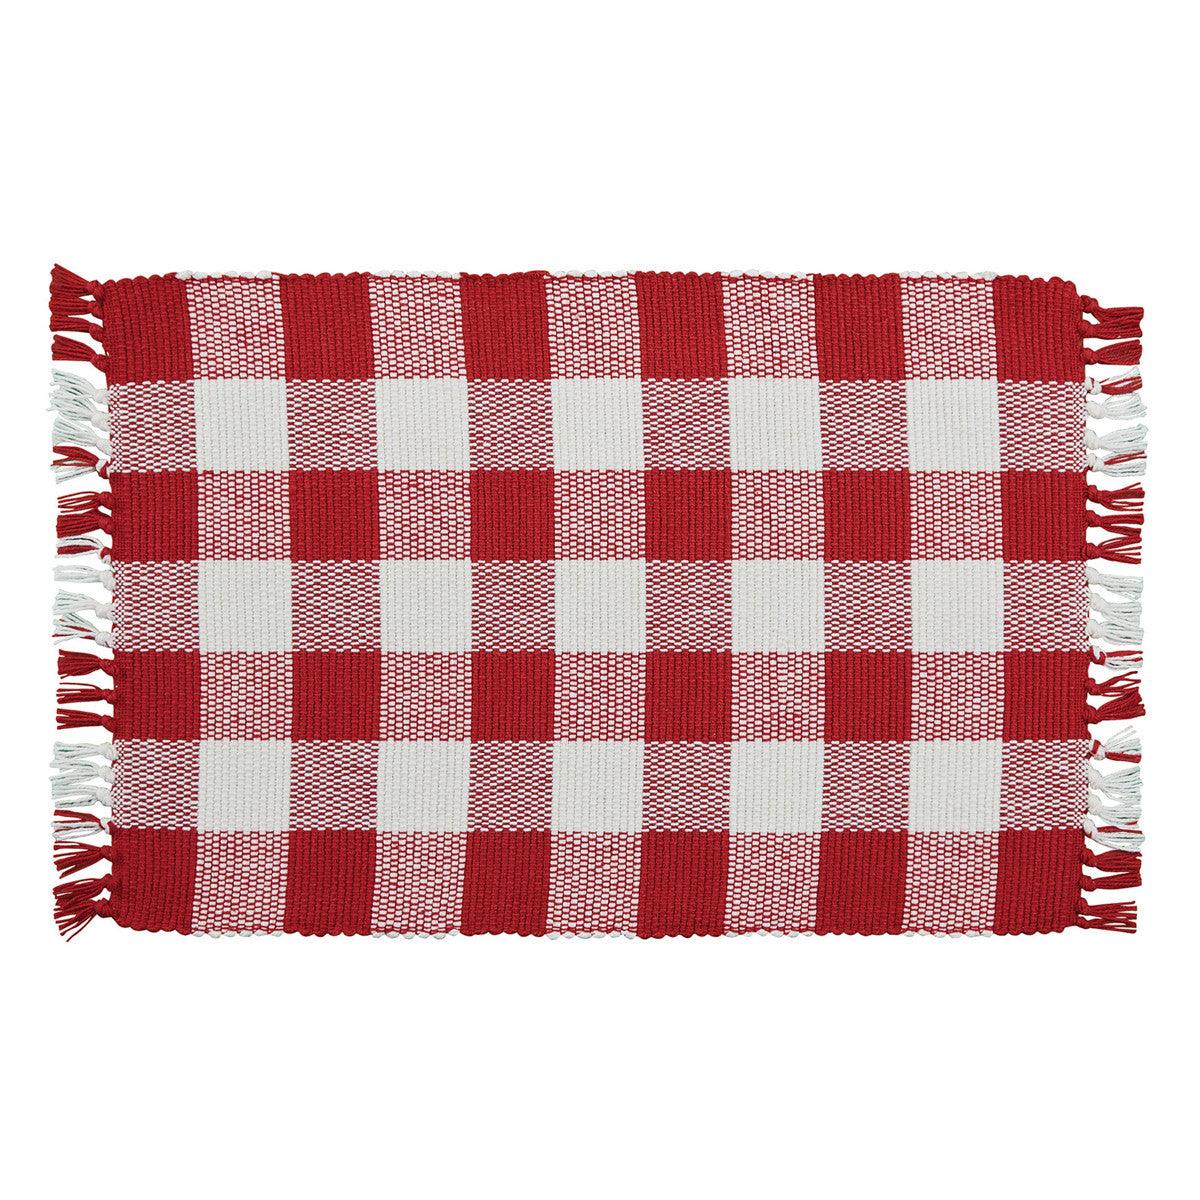 Wicklow Check Placemats - Red & Cream Set Of 6 Park Designs - The Fox Decor